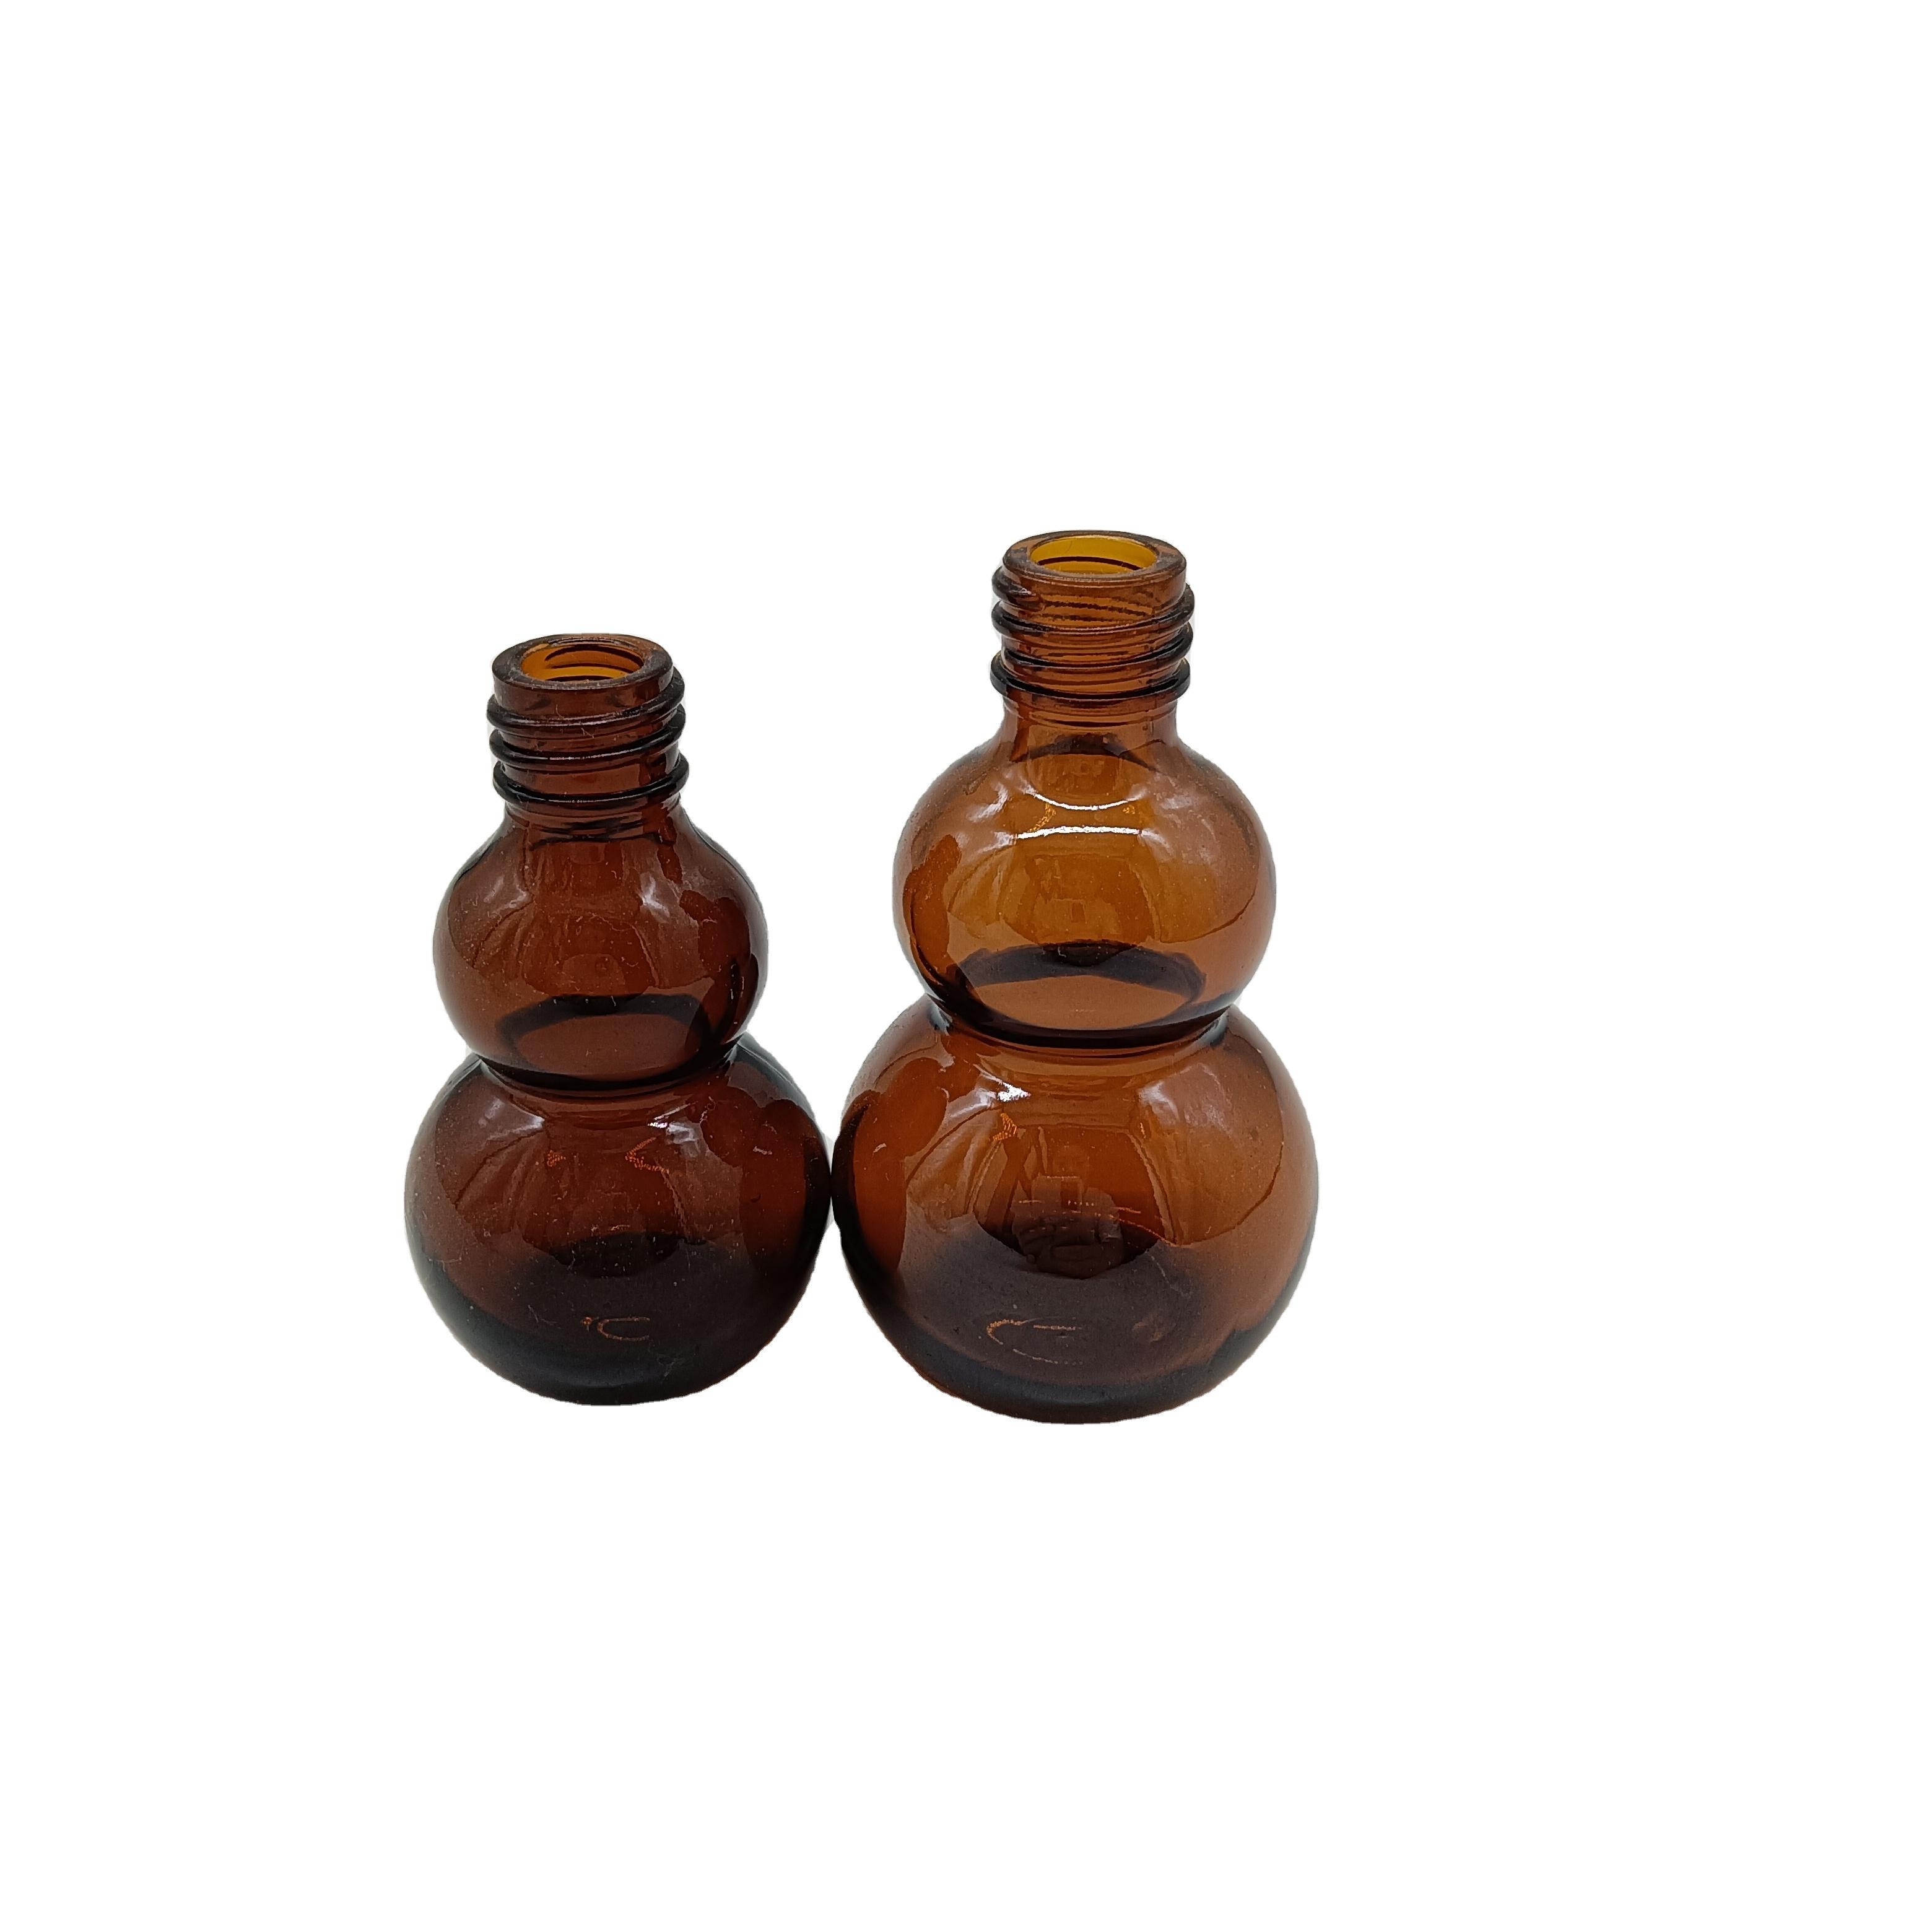 A little knowledge about essential oil glass bottles